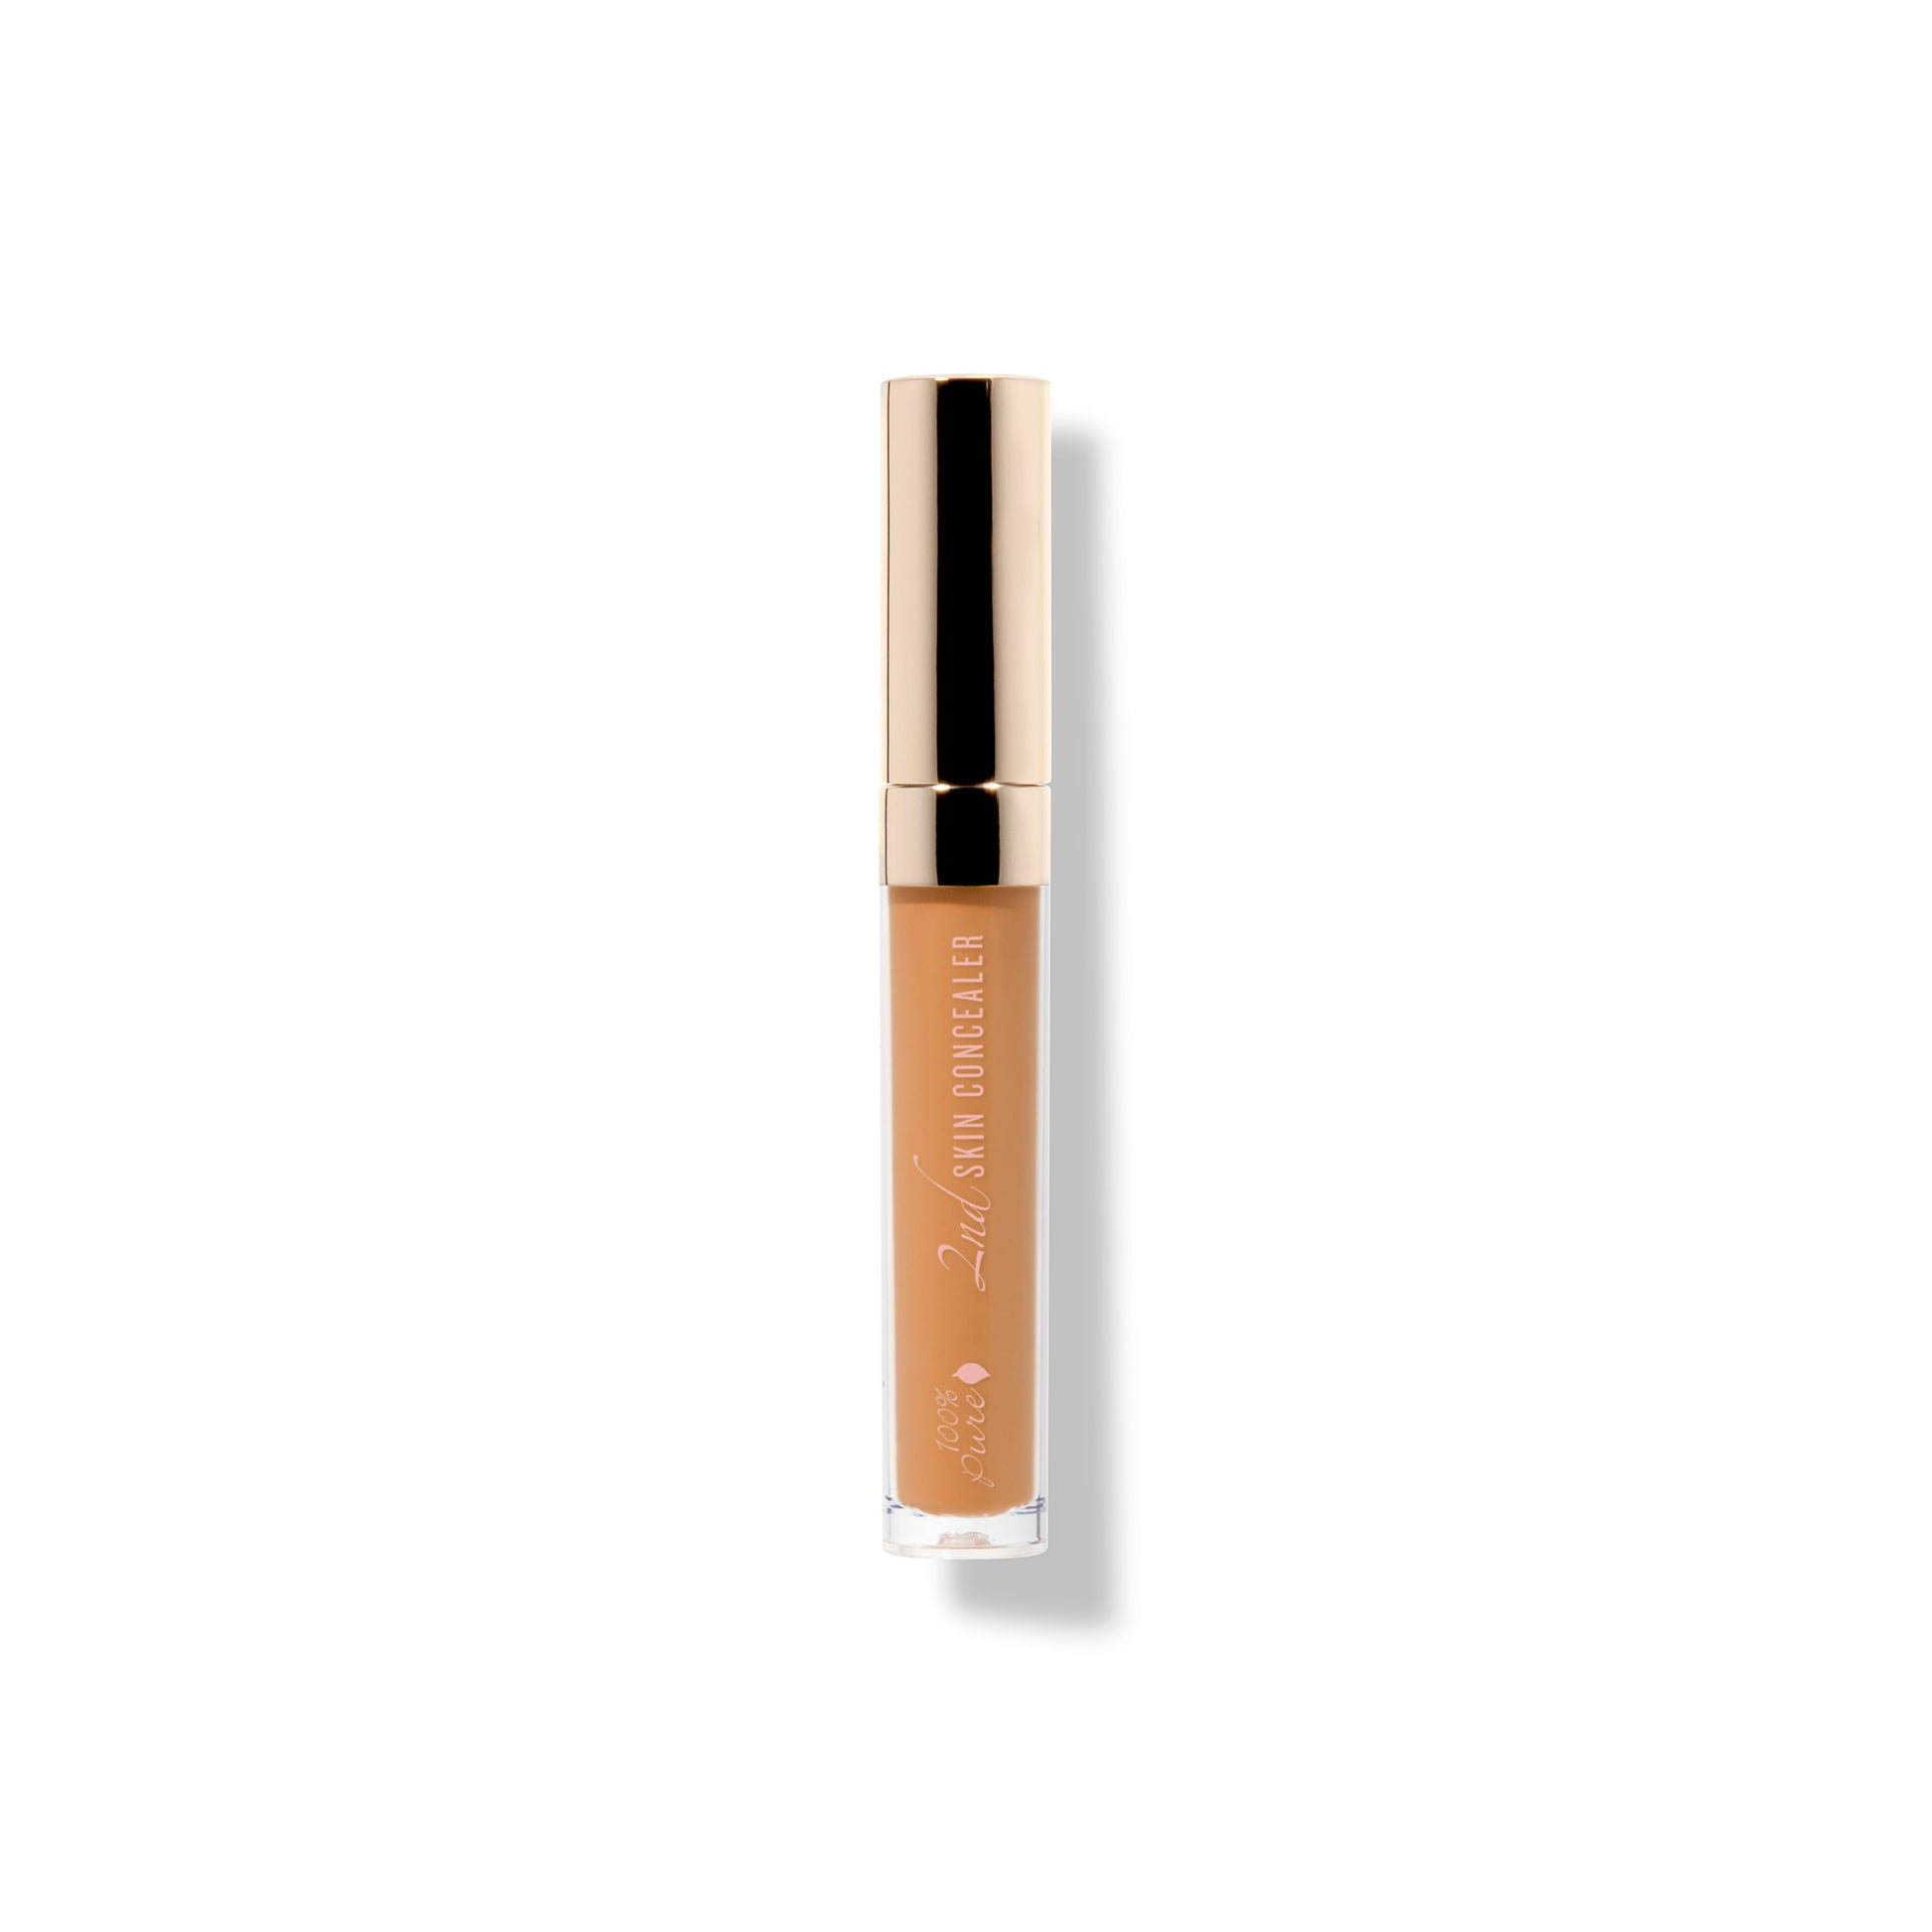 100% PURE Fruit Pigmented 2nd Skin Concealer shade 5